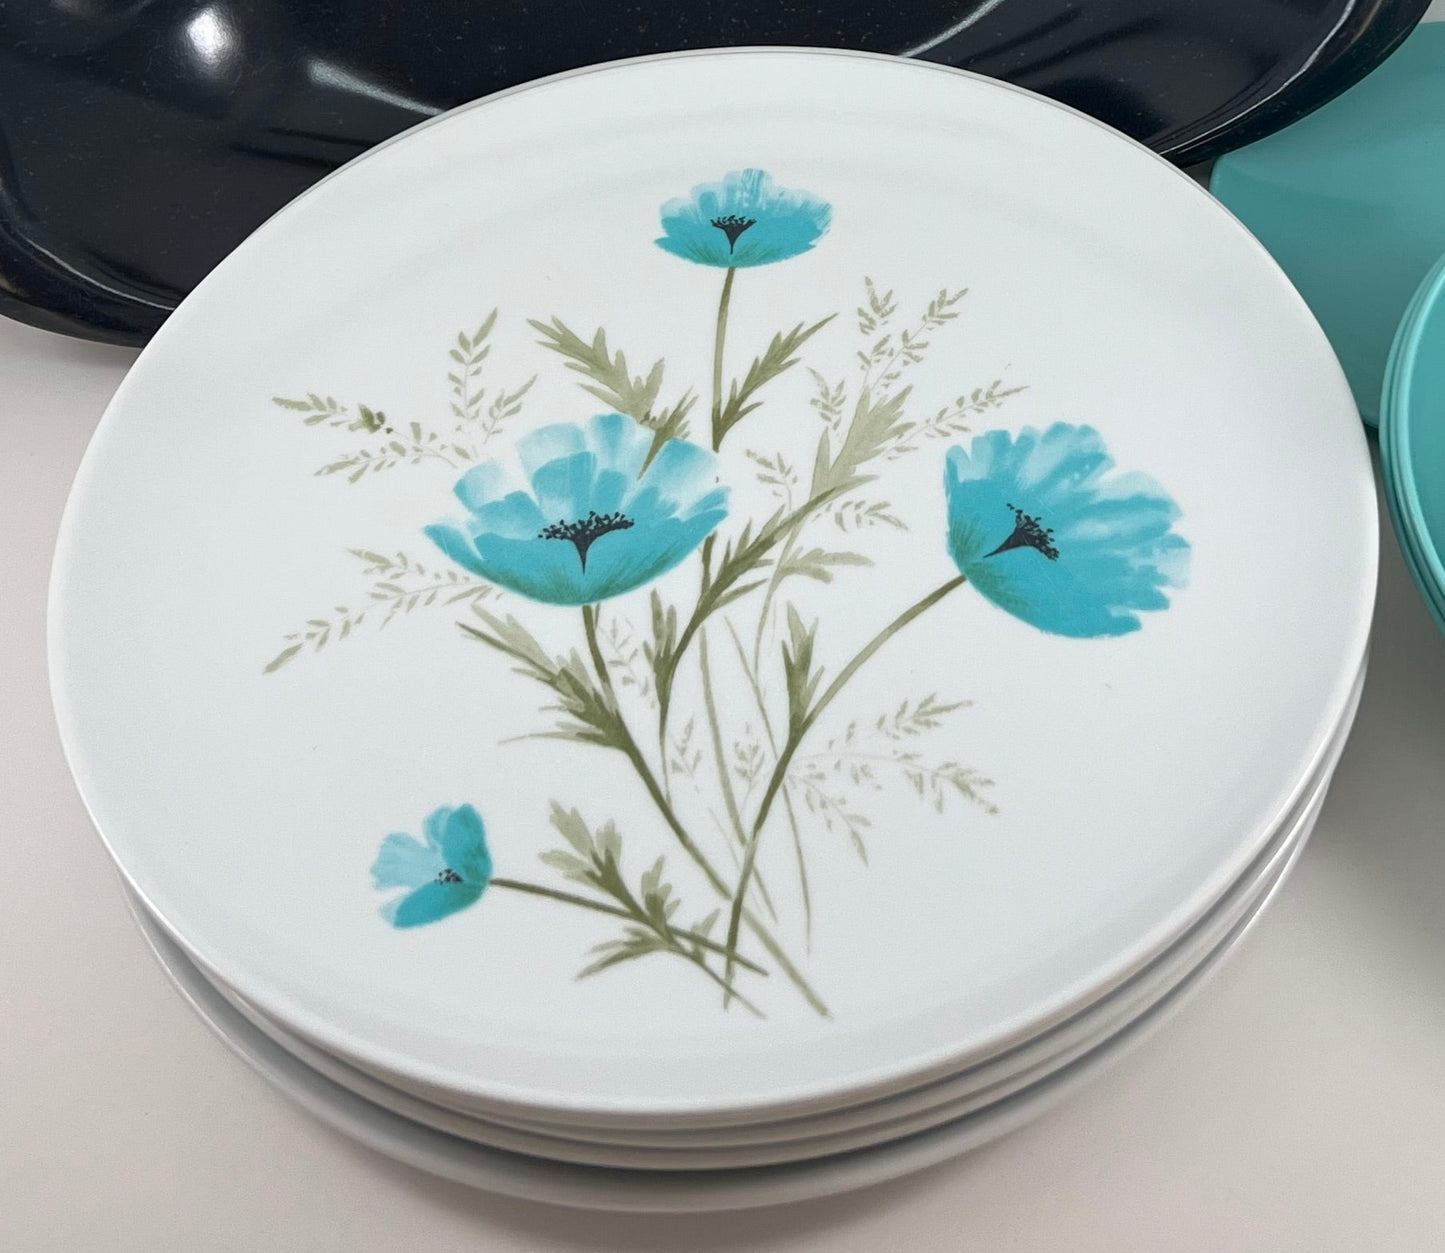 Mid-century Melamine Turquoise Poppies Dinnerware with Serving Pieces. c. 1965